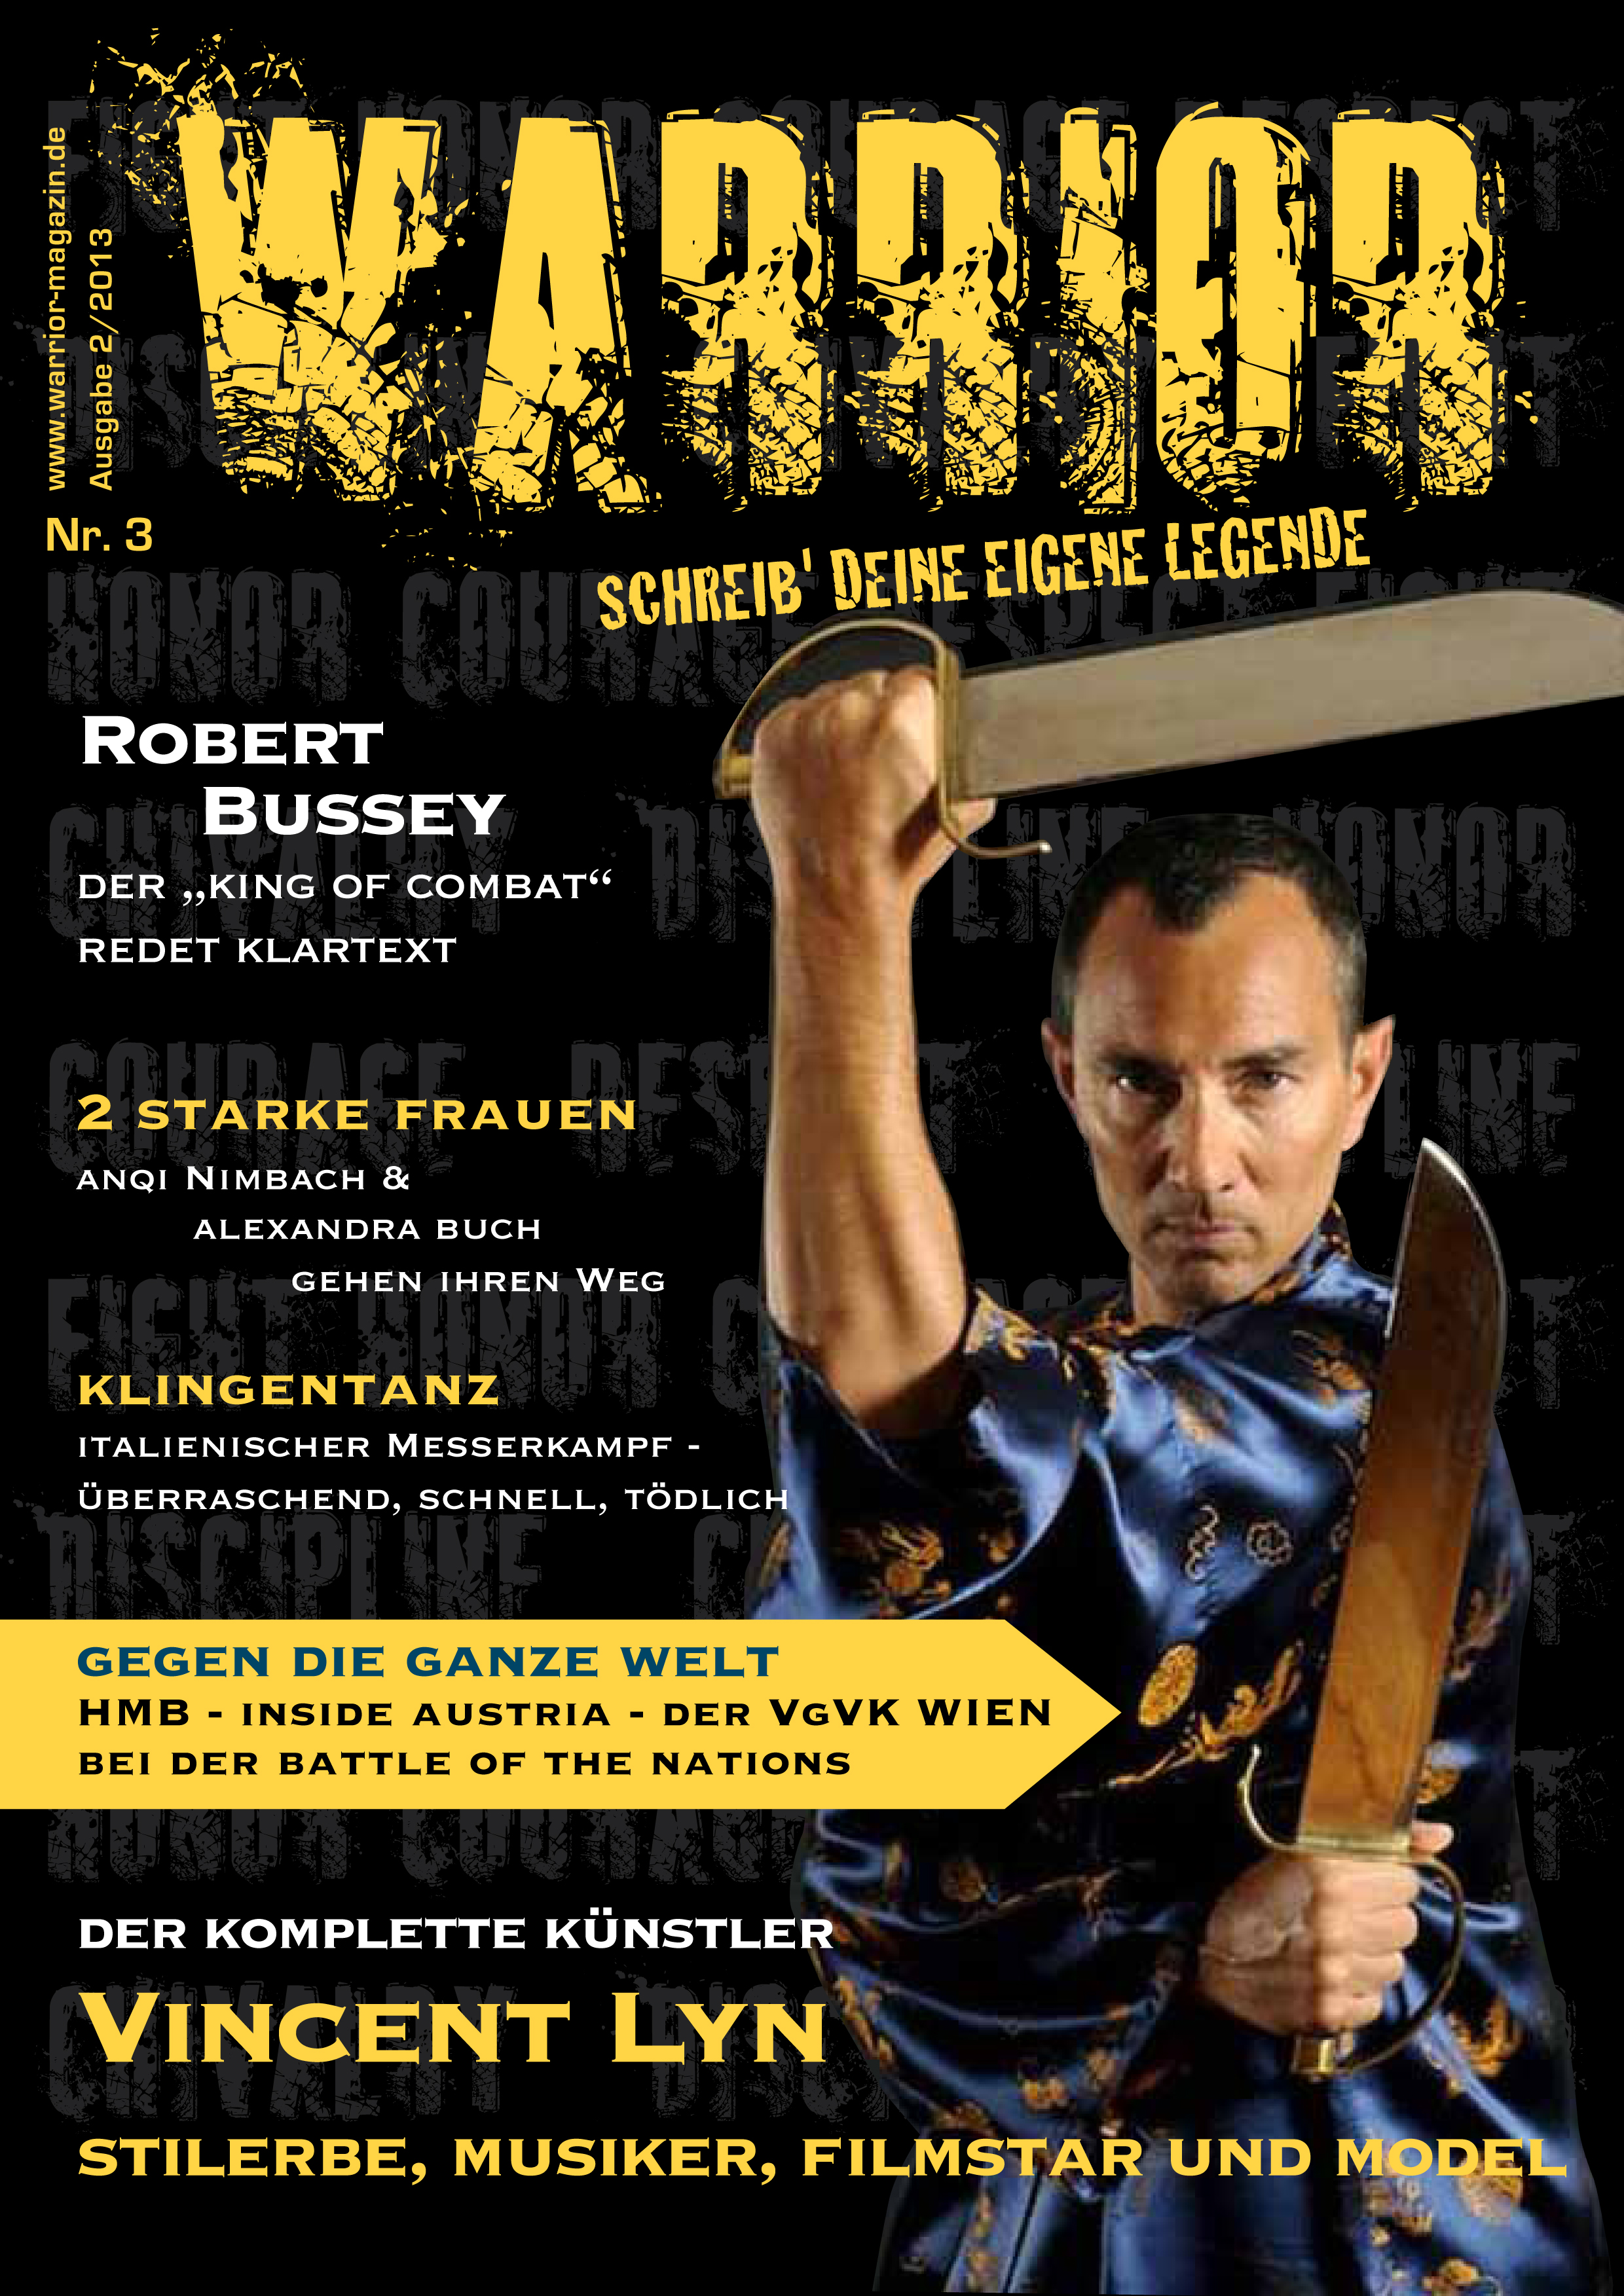 Gracing the cover of Warrior Magazine, August, 2013